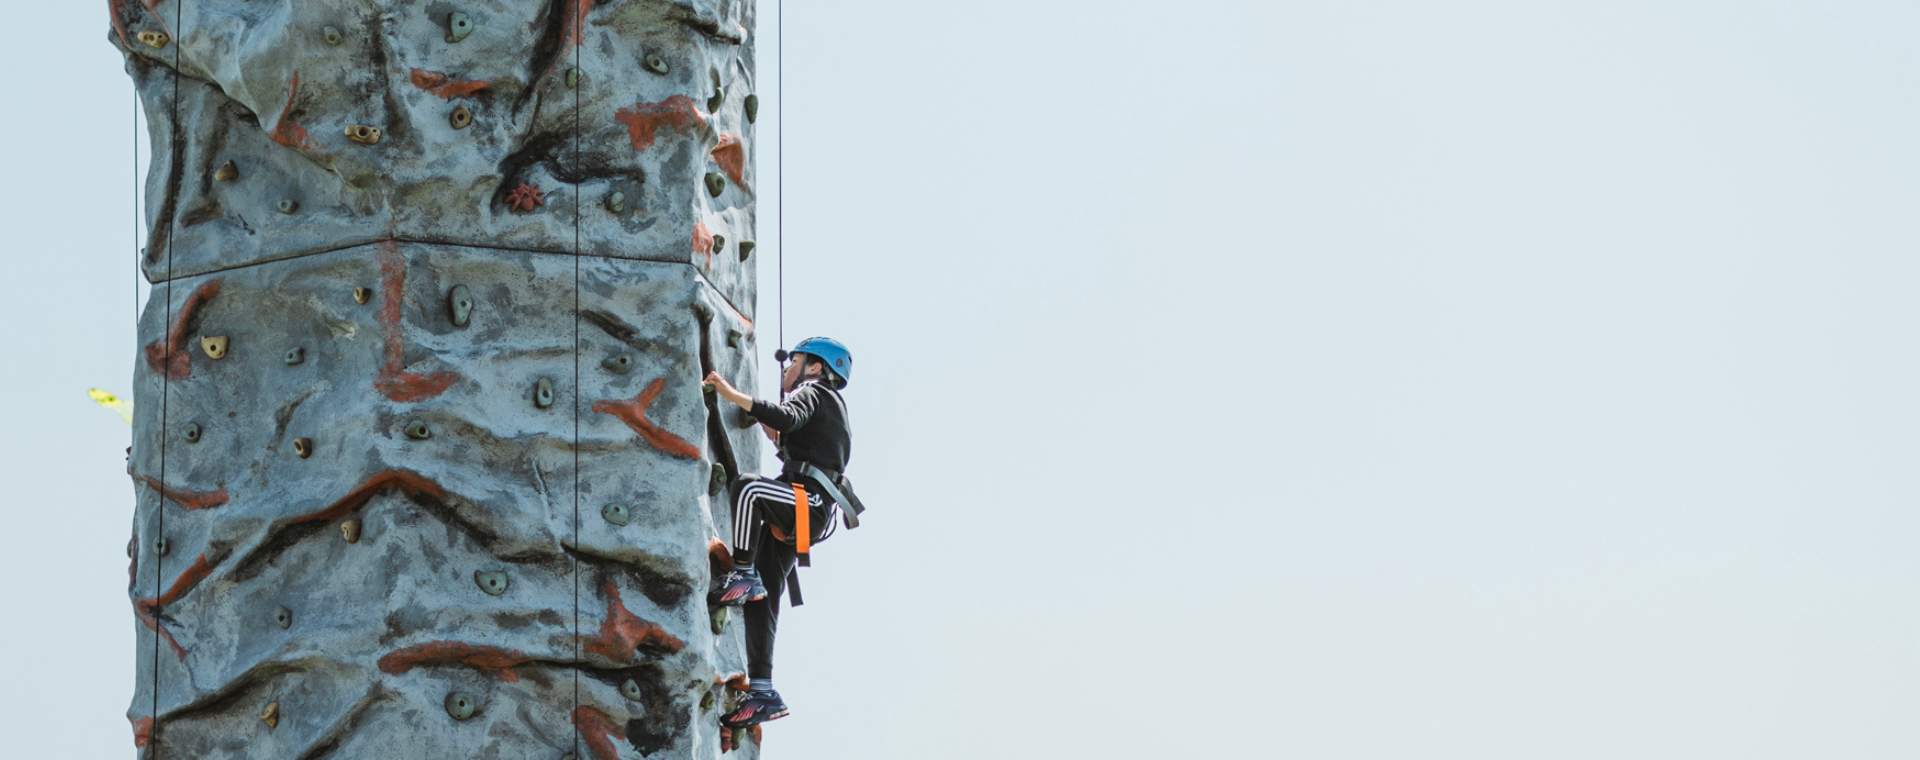 Little boy scaling an outdoor climbing wall at an event in East Yorkshire